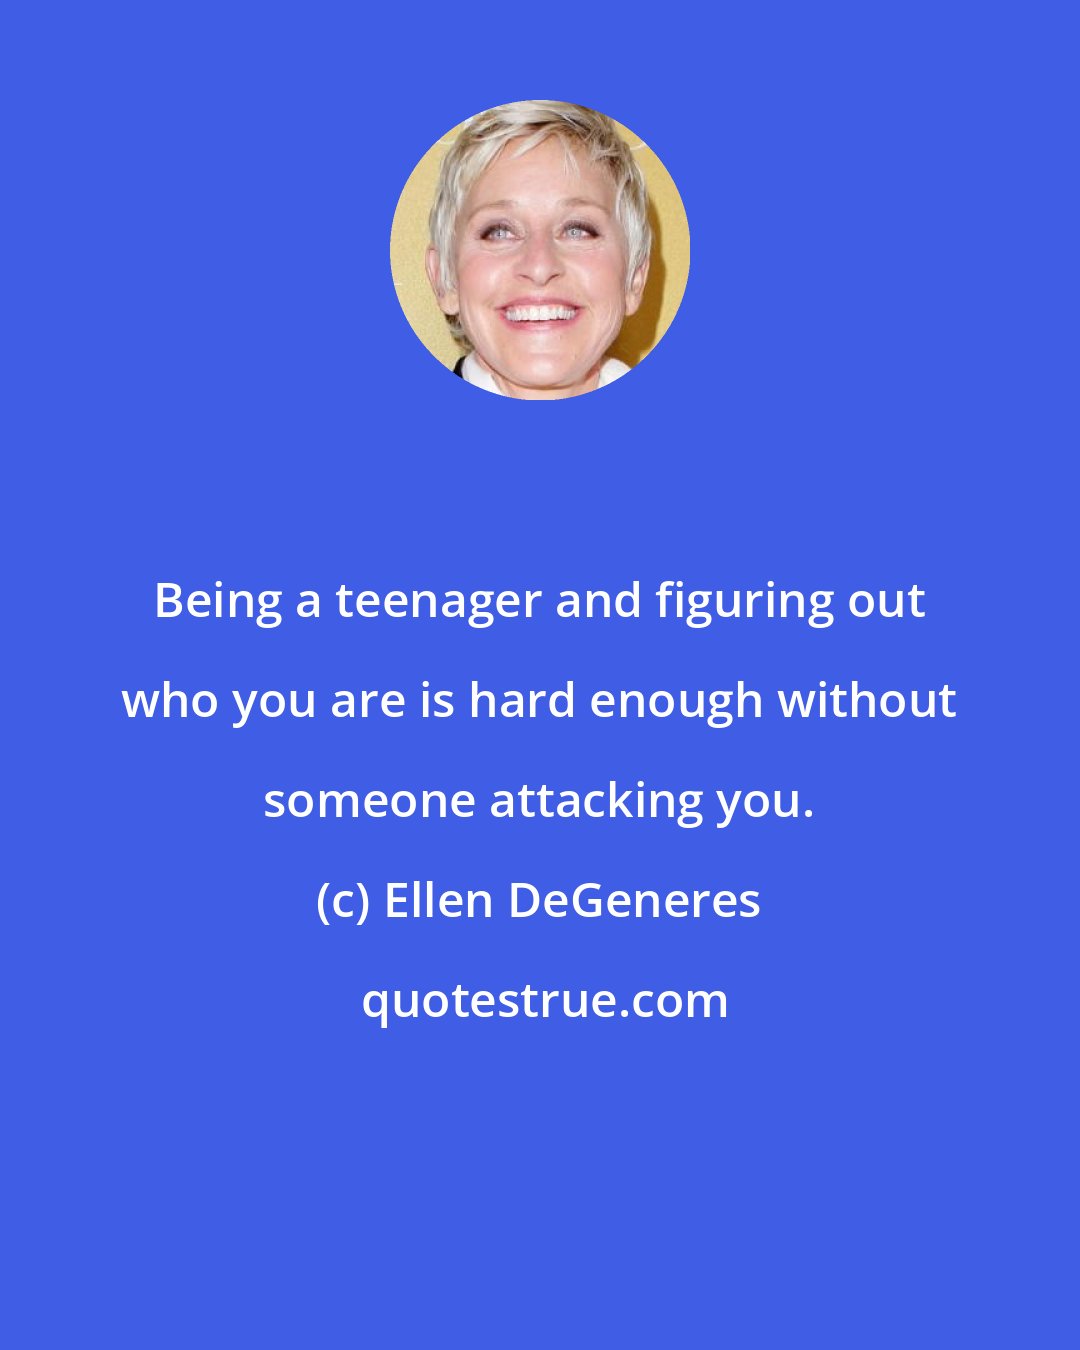 Ellen DeGeneres: Being a teenager and figuring out who you are is hard enough without someone attacking you.